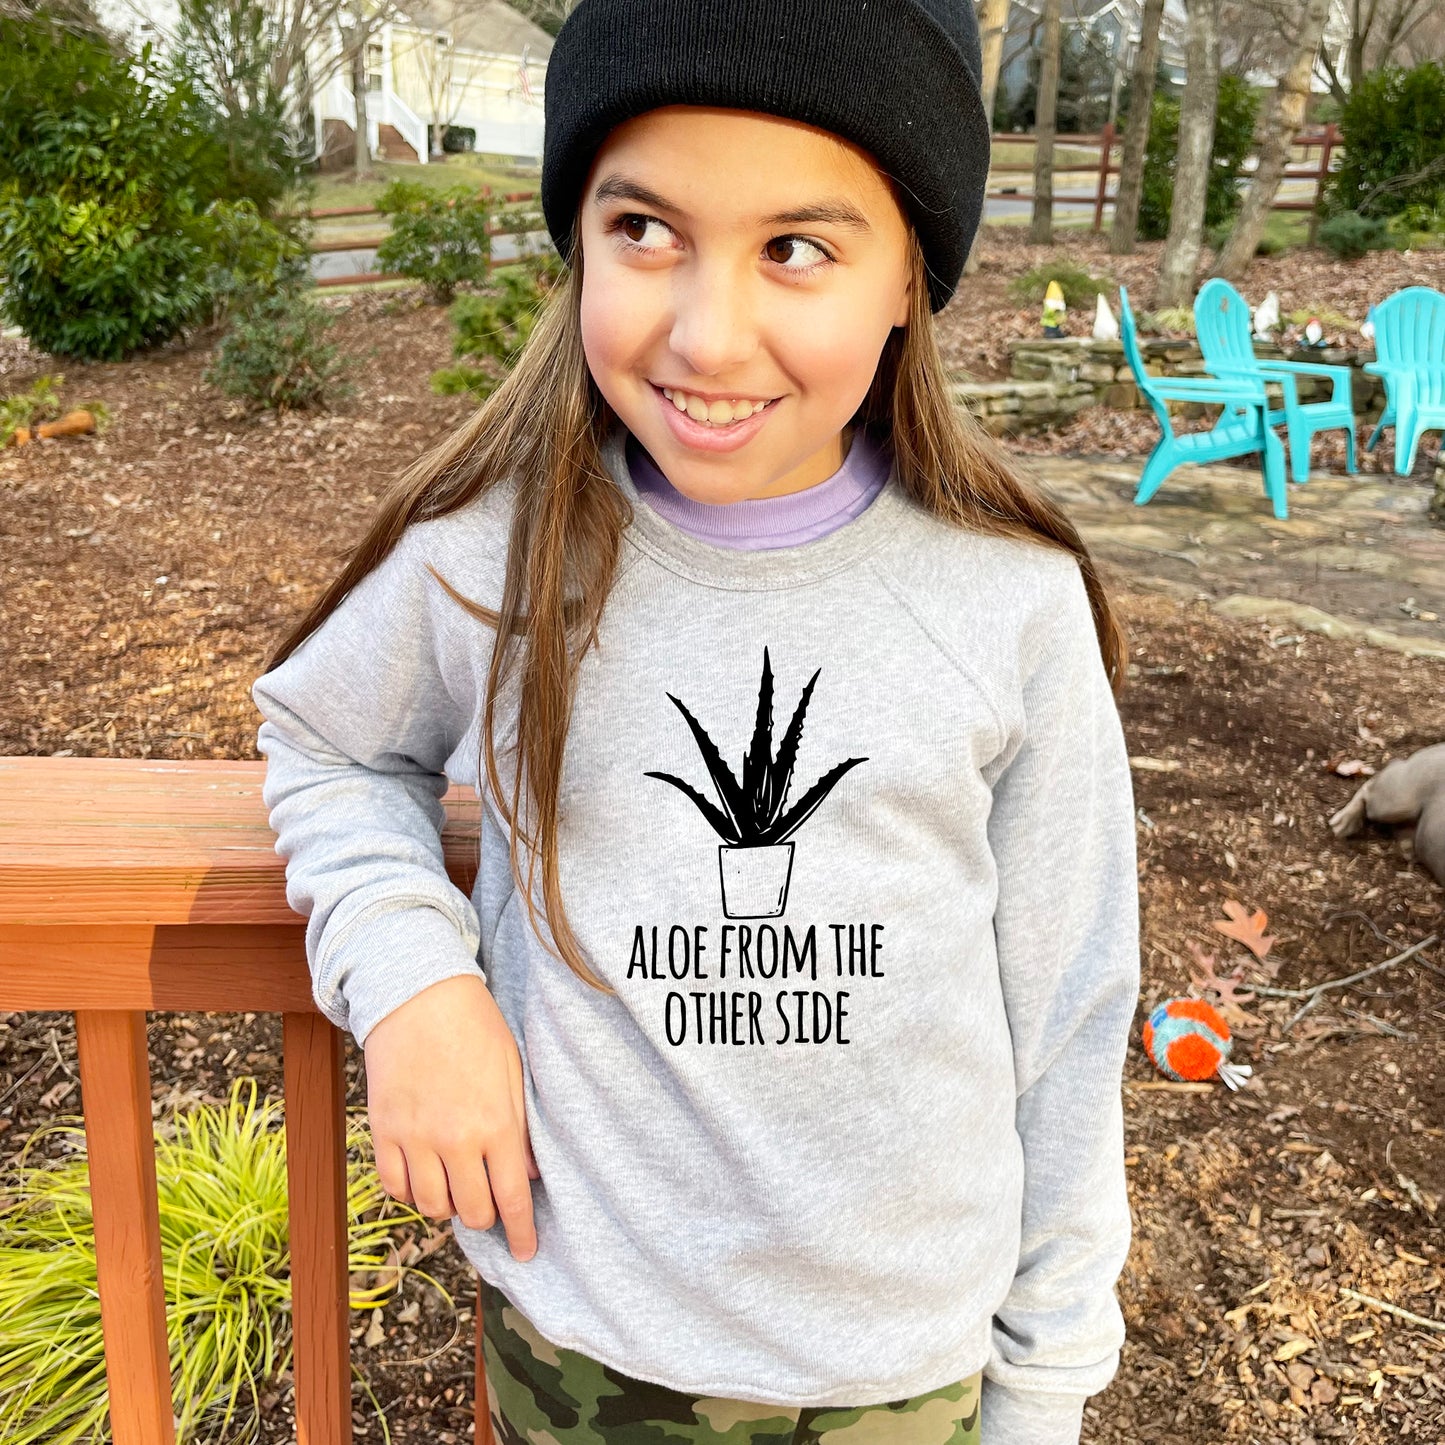 Aloe From The Other Side - Kid's Sweatshirt - Heather Gray or Mauve